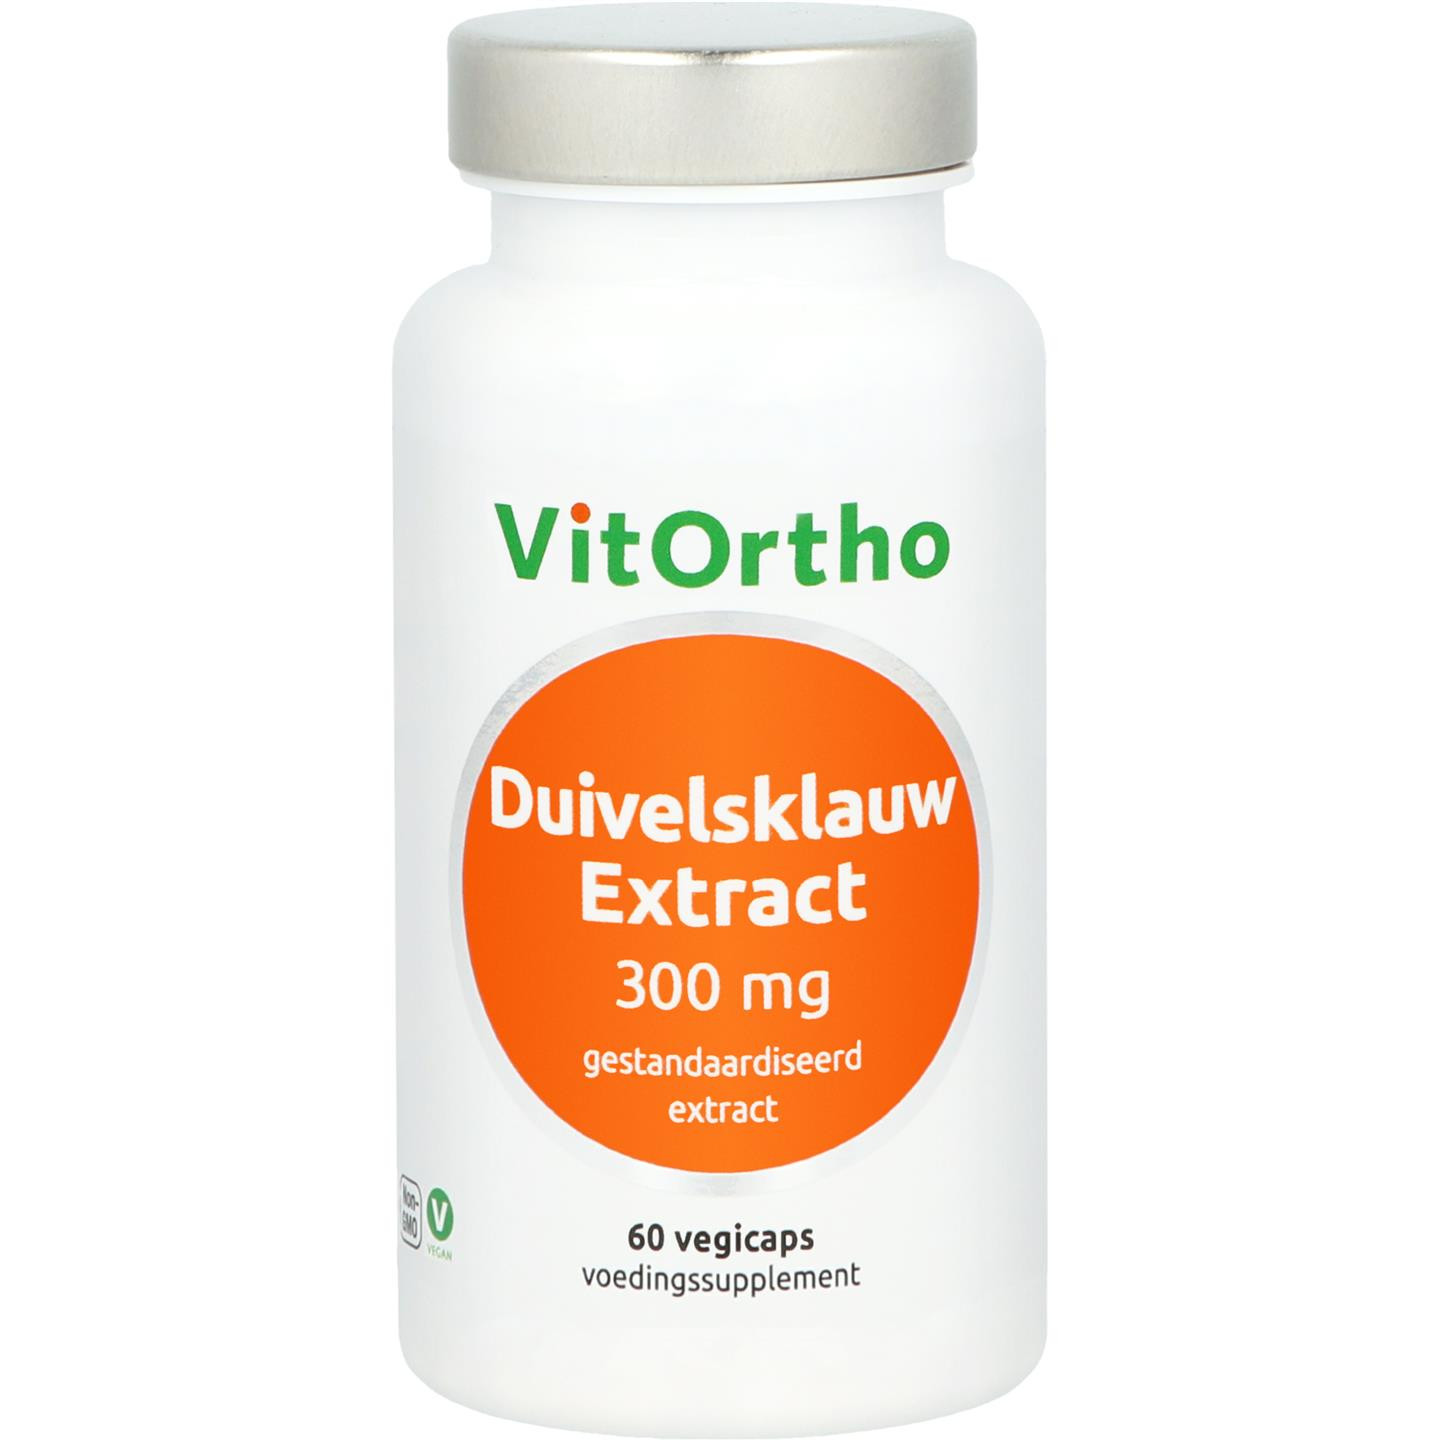 Duivelsklauw extract 300 mg